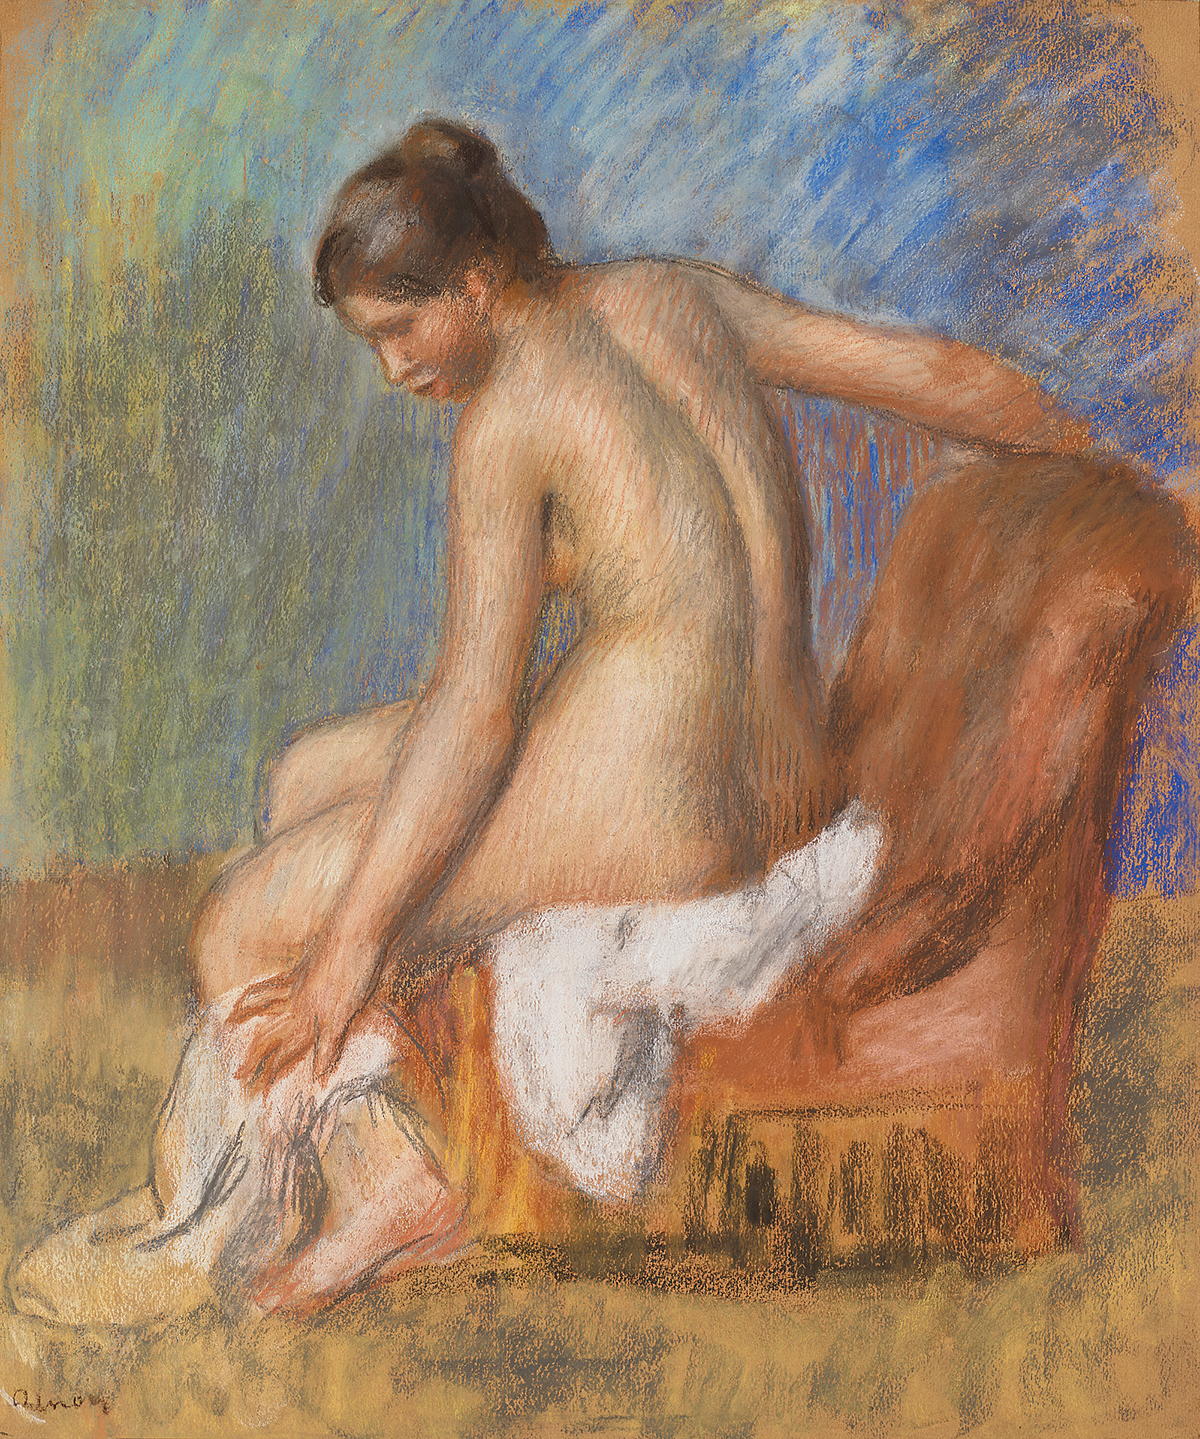 Drawing of a nude figure seated in a chair reaching towards the white fabric around her ankle.